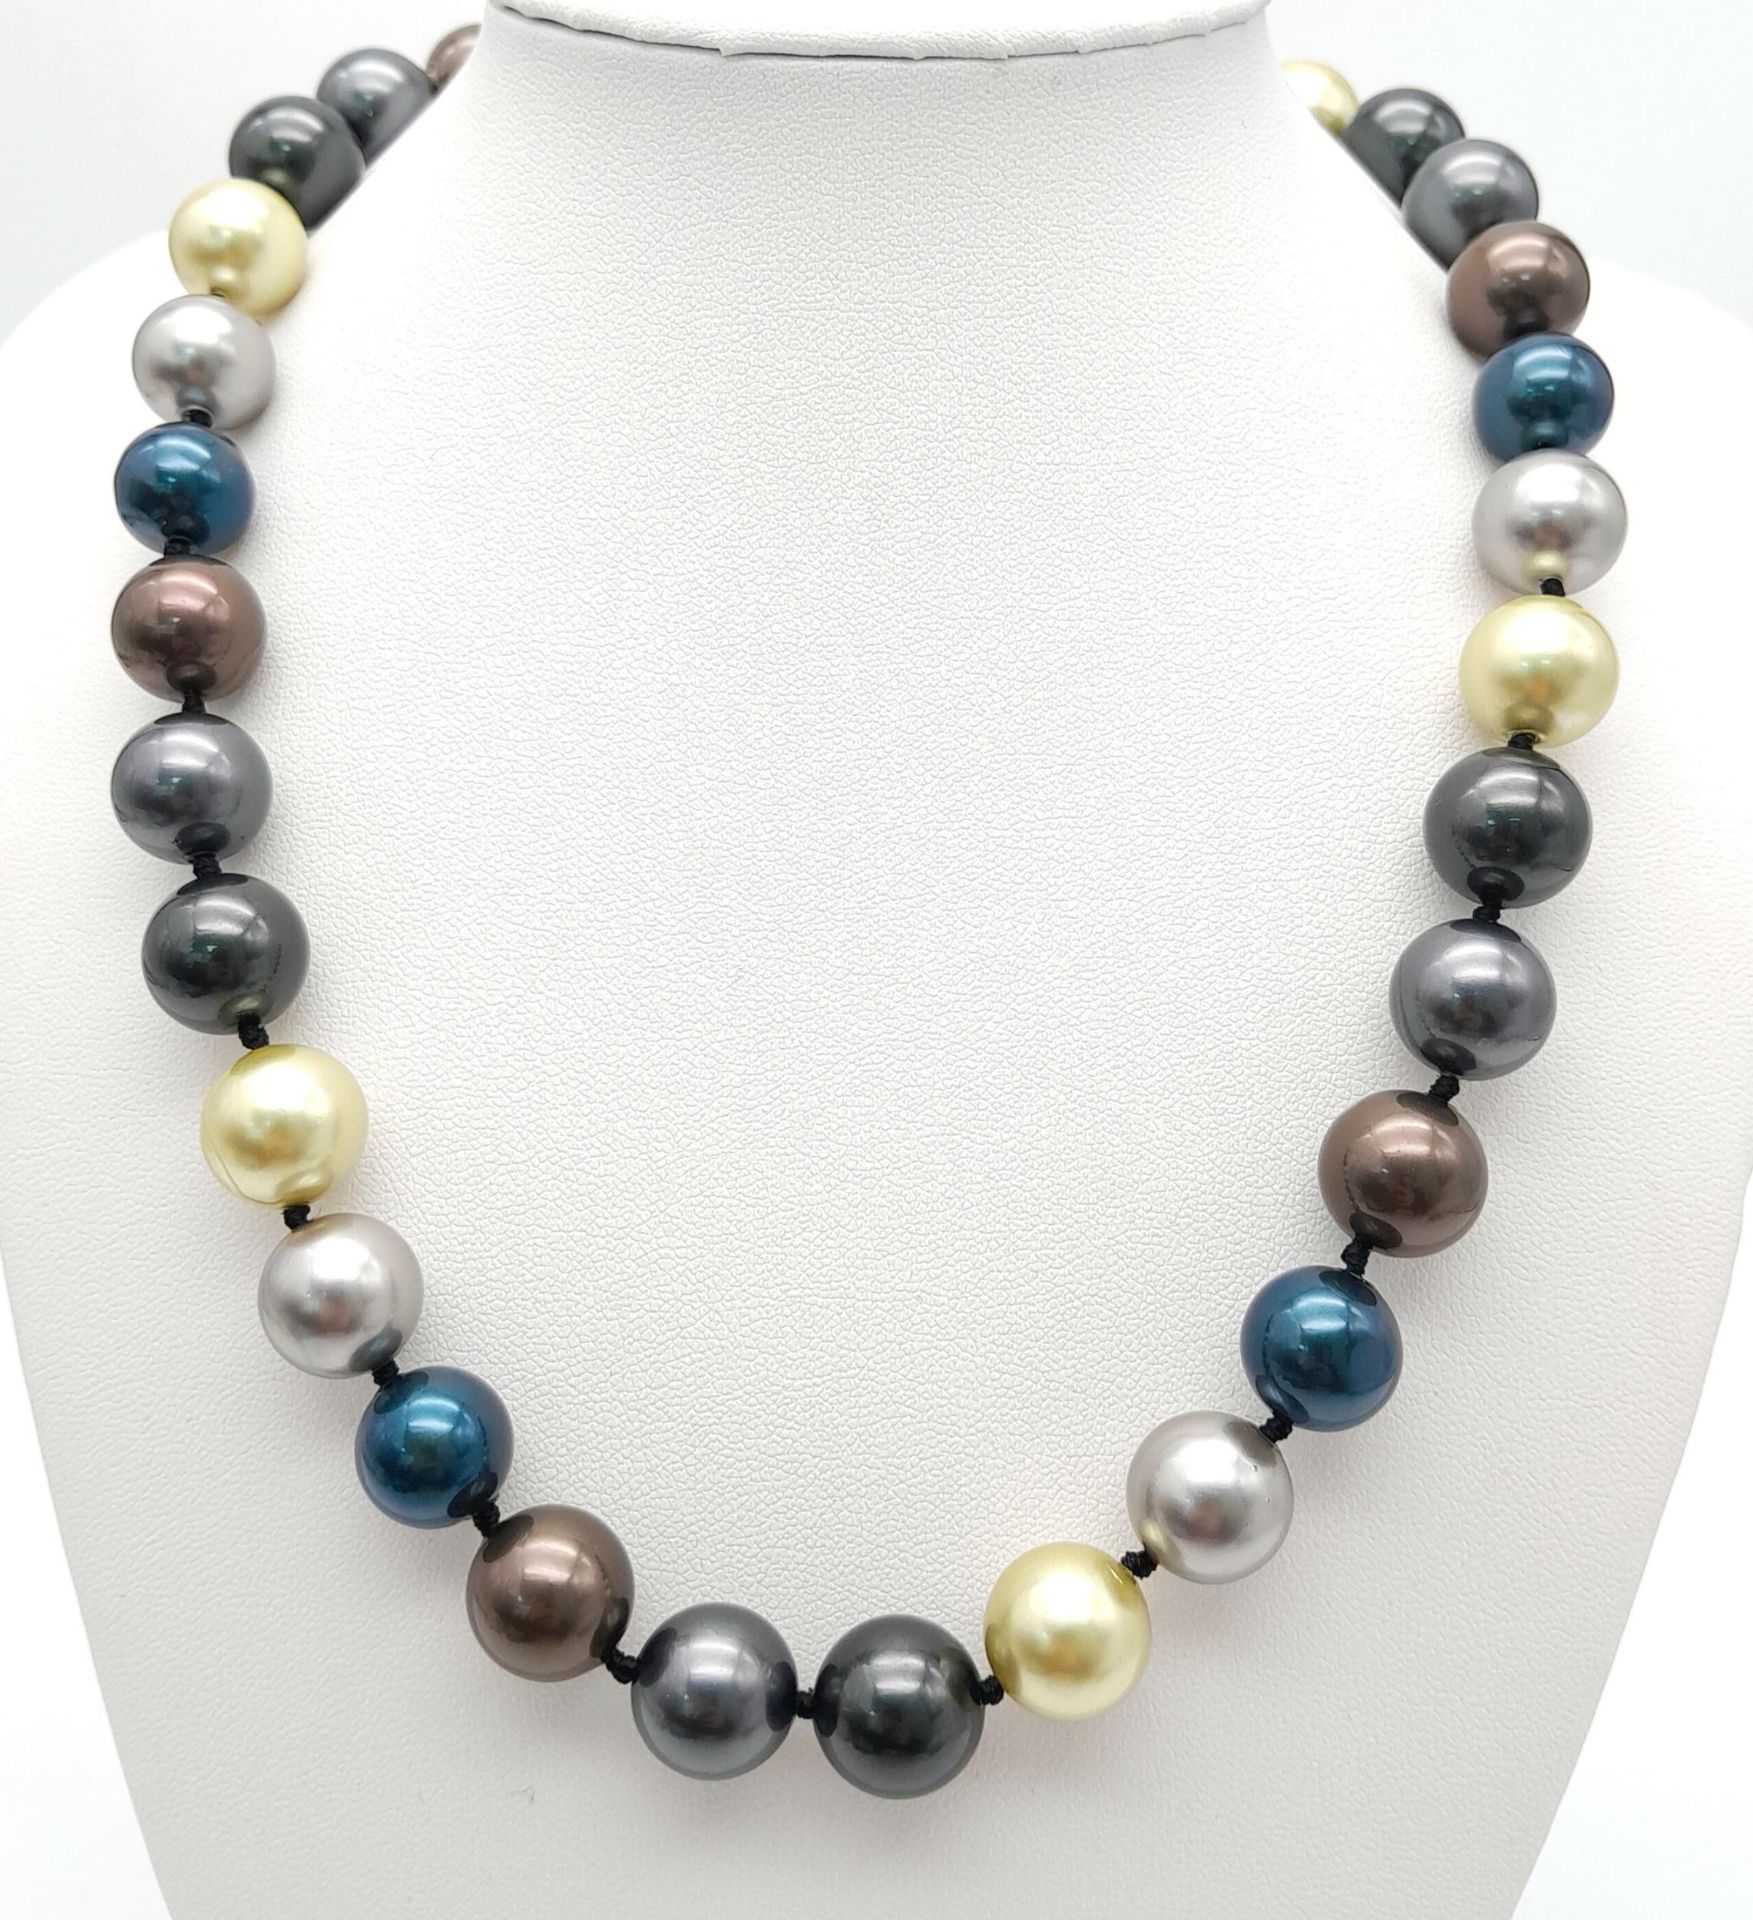 A Multi-Colour South Sea Pearl Shell Beaded Necklace. 12mm. Necklace length - 45cm length.